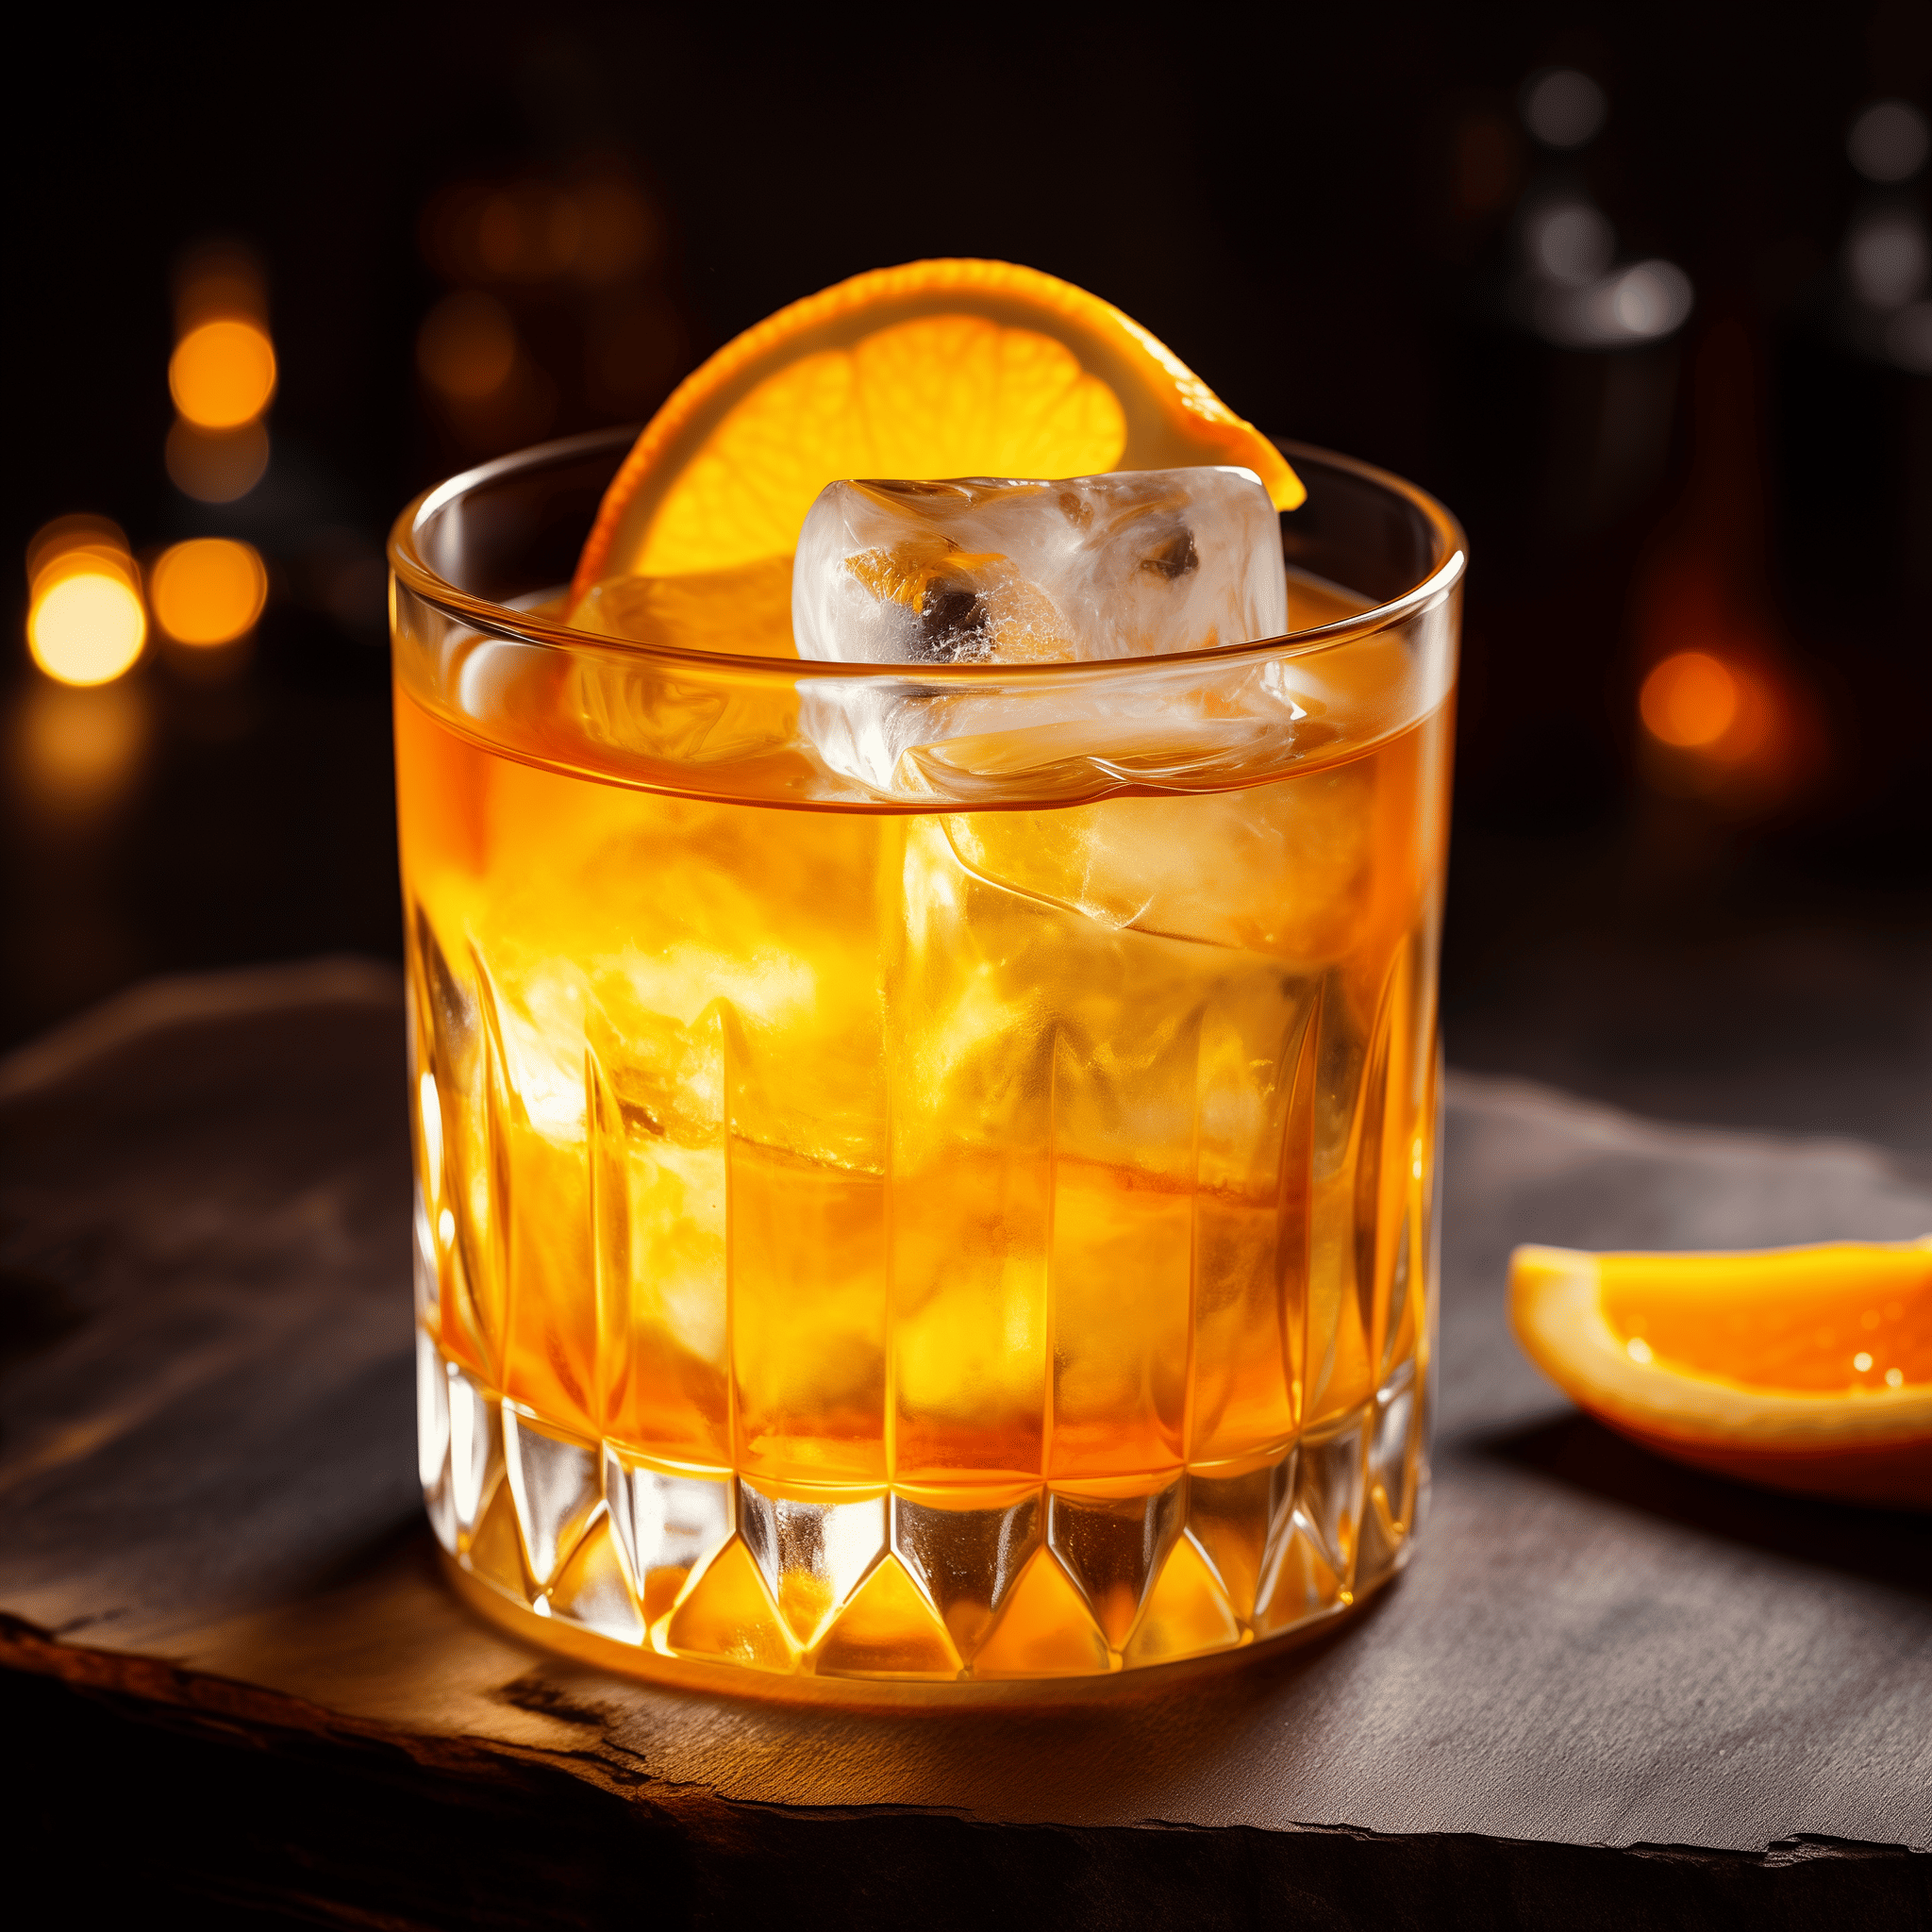 Bourbon Breeze Cocktail Recipe - The Bourbon Breeze offers a harmonious blend of warmth from the bourbon, tartness from the cranberry juice, and a zesty kick from the fresh citrus. It's a bold yet balanced drink with a sweet and sour profile that finishes with a smooth whiskey aftertaste.